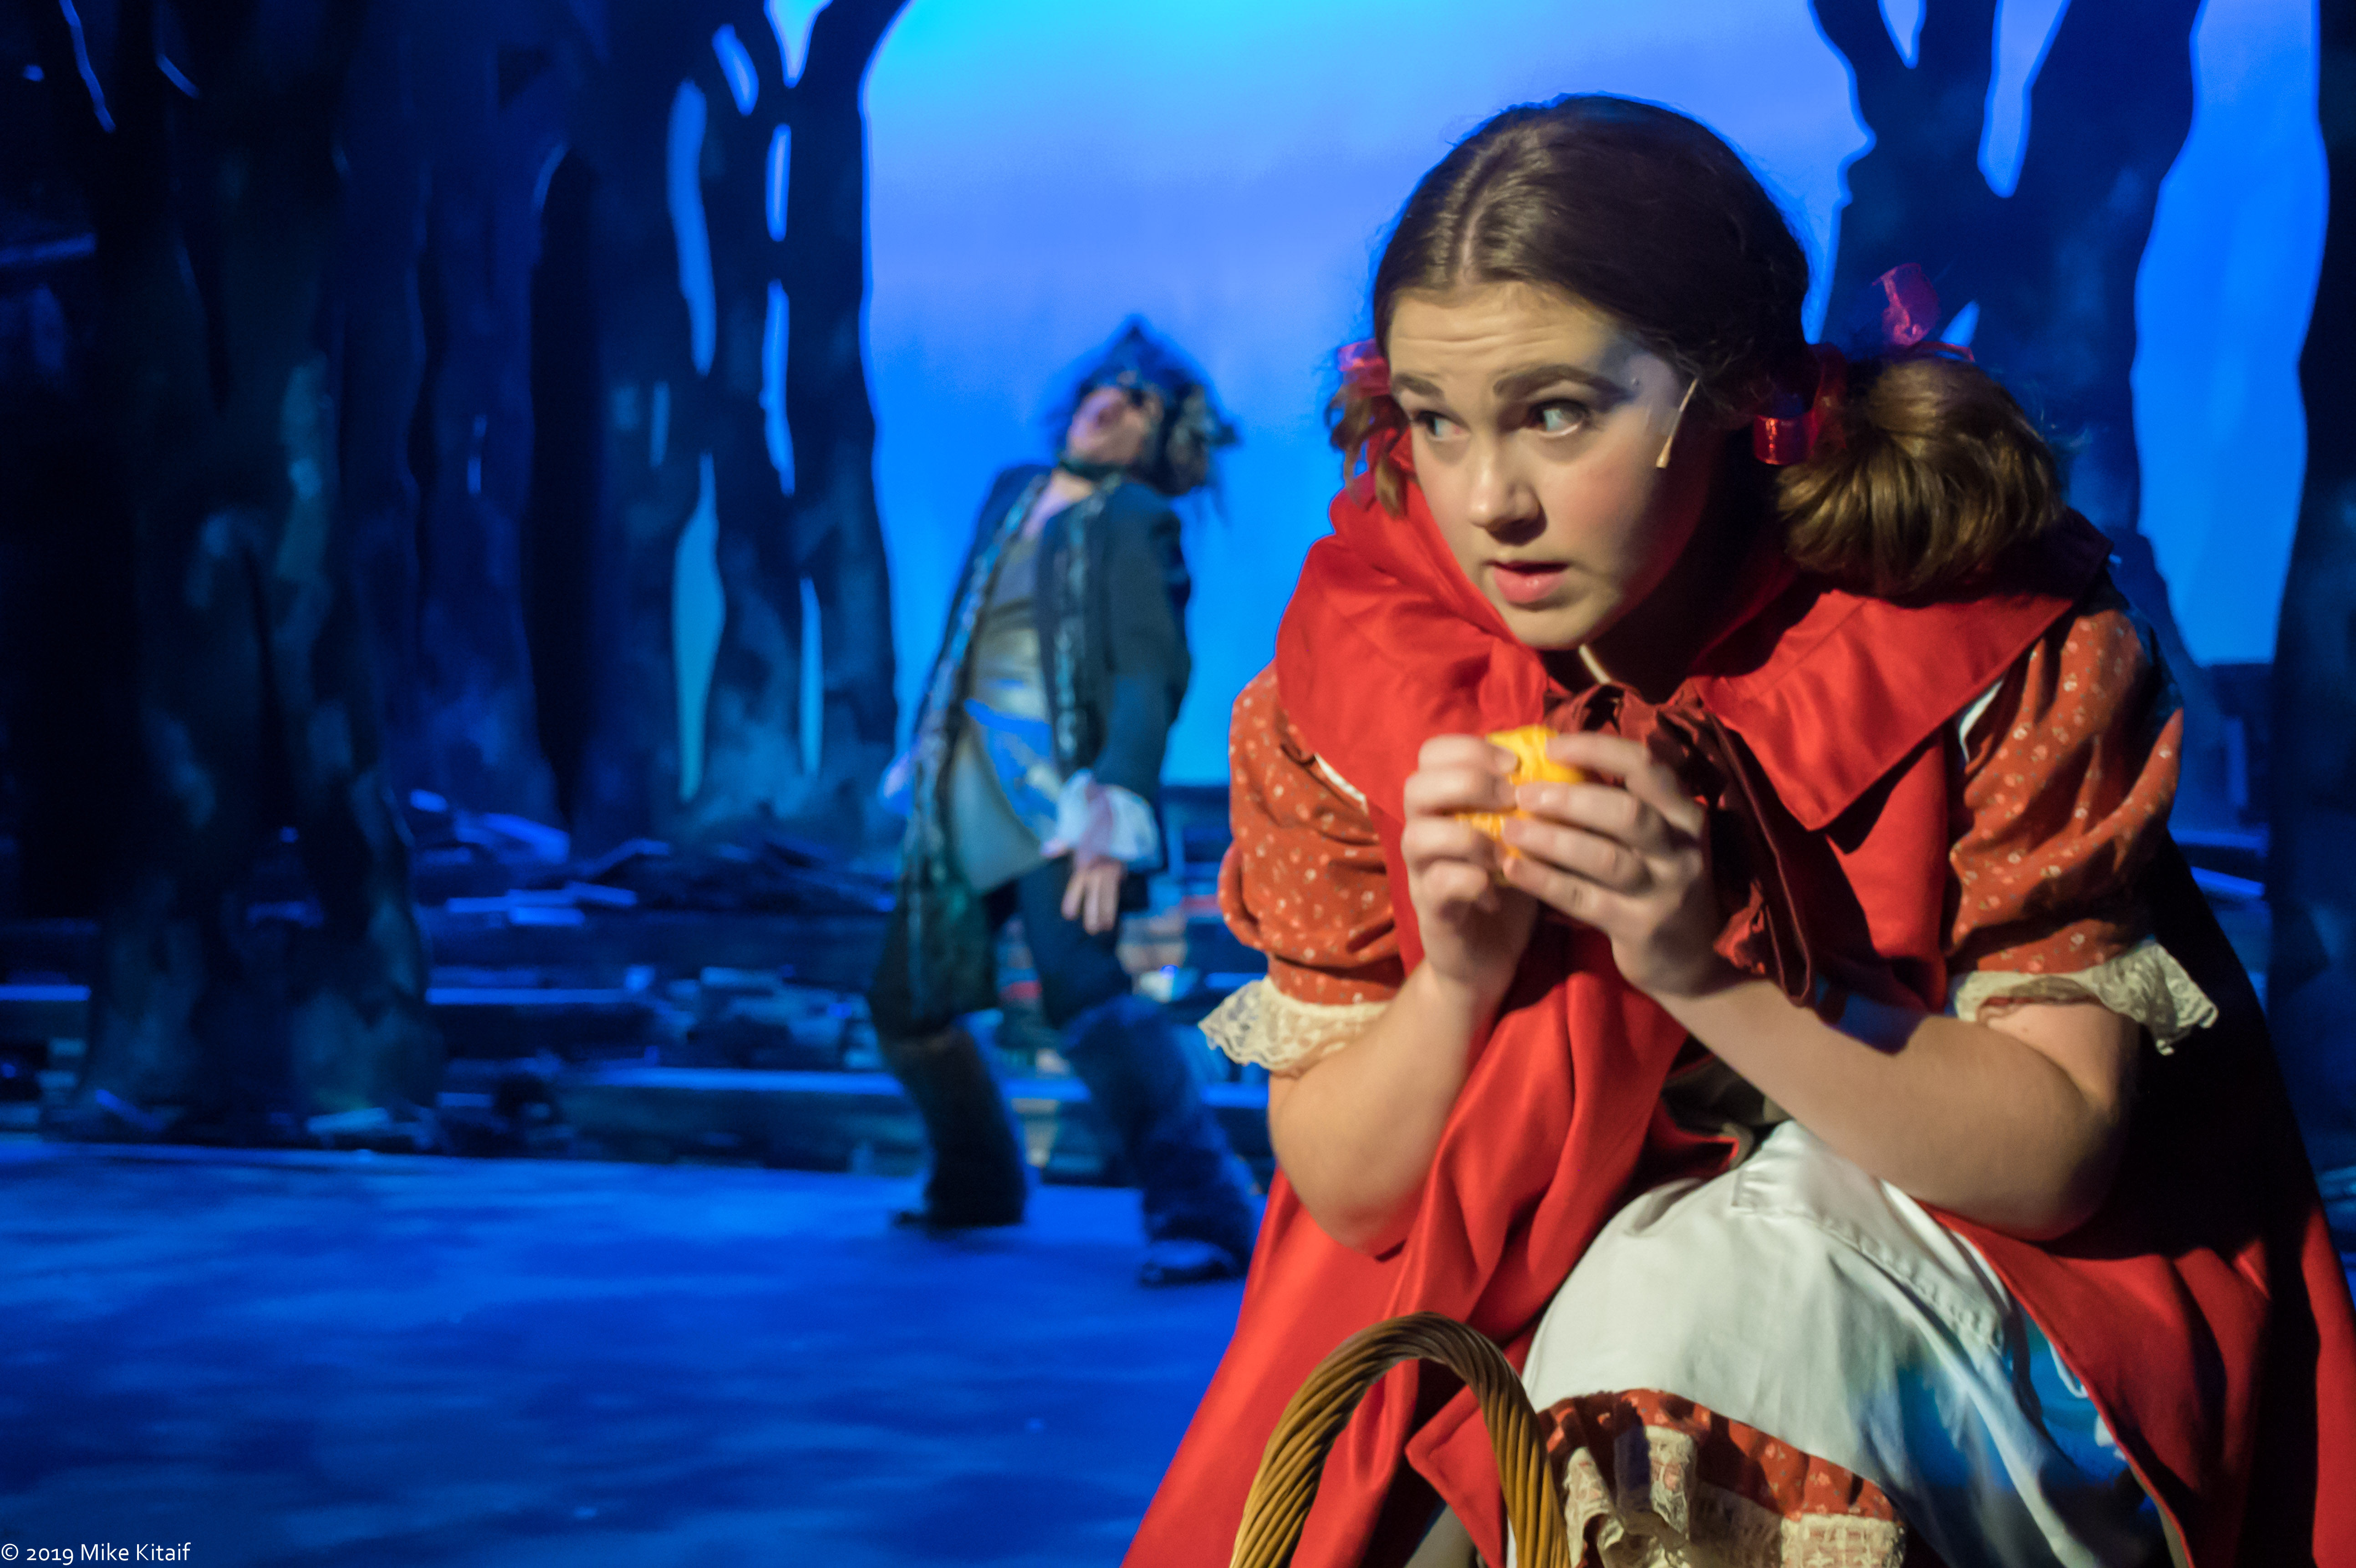 Little Red Riding Hood (Hayley Sanz) is on her way to her grandmothers house when she encounters a wolf (Andrew Johnson).